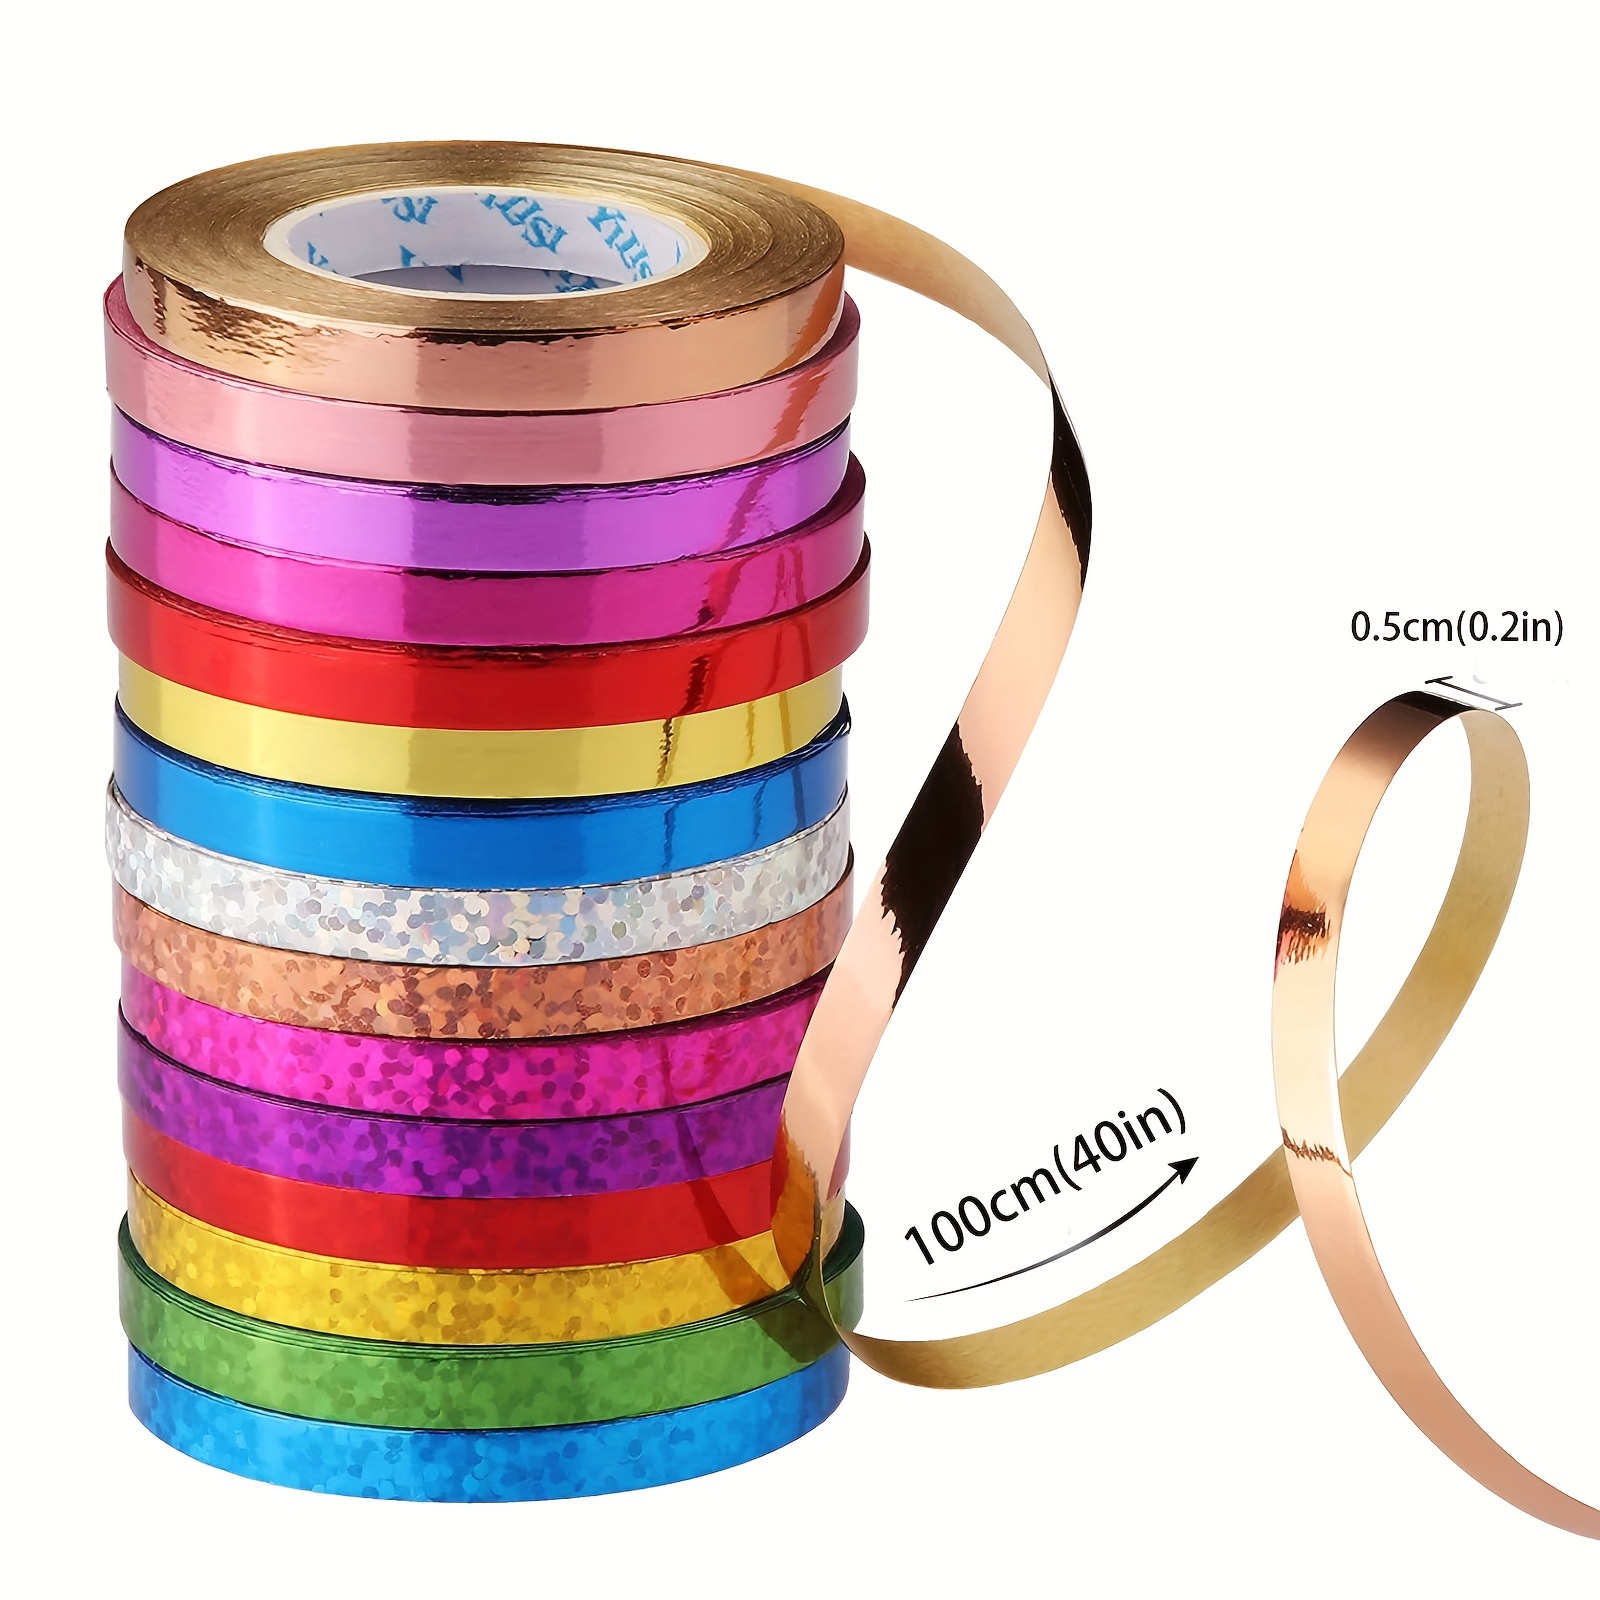 500 Yards 3/16 Wide Pink Curling Ribbon Gift Wrap Present Wrapping Bow Tie  Wrap